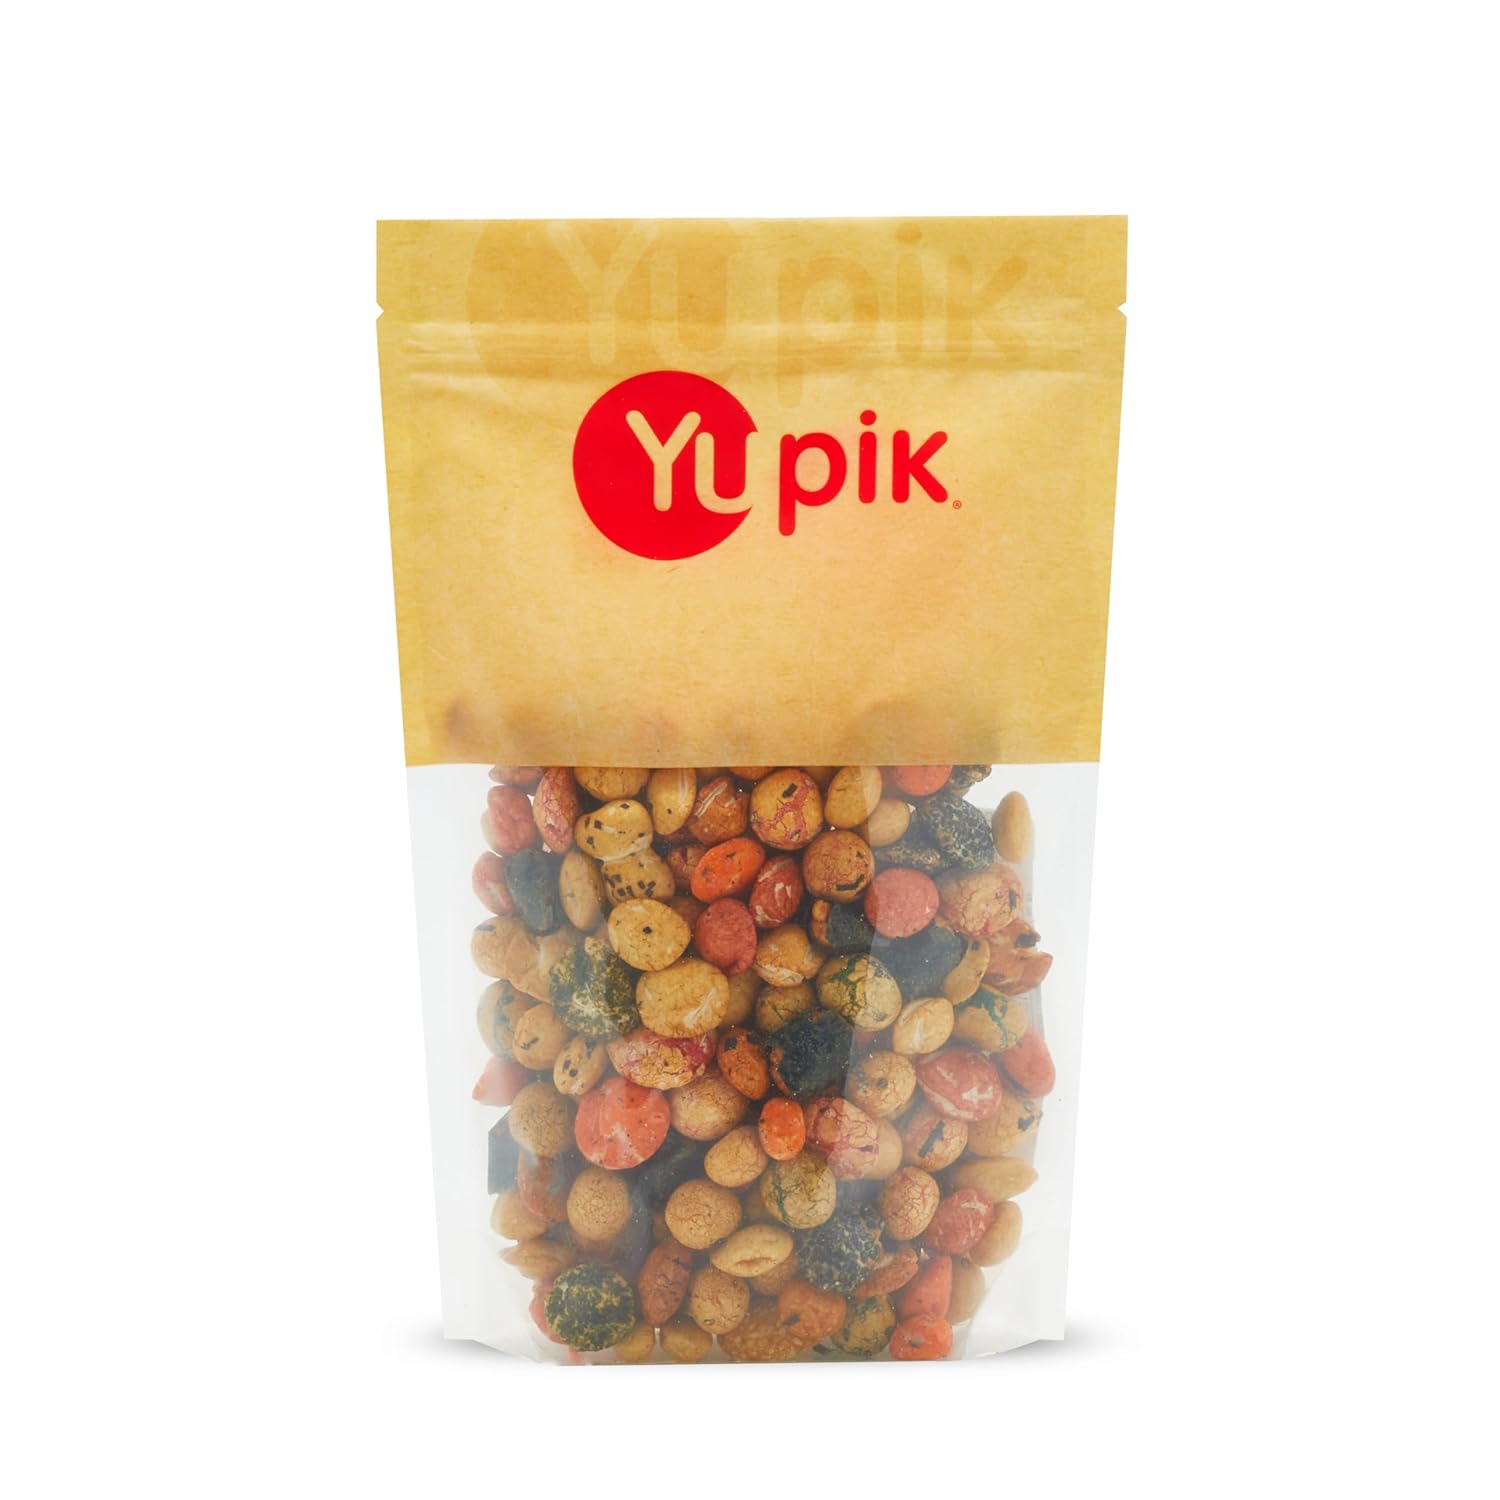 Yupik Tokyo Snack Mix, 1 lb, A savory blend of peanuts covered in a rice cracker coating and flavored with soy sauce